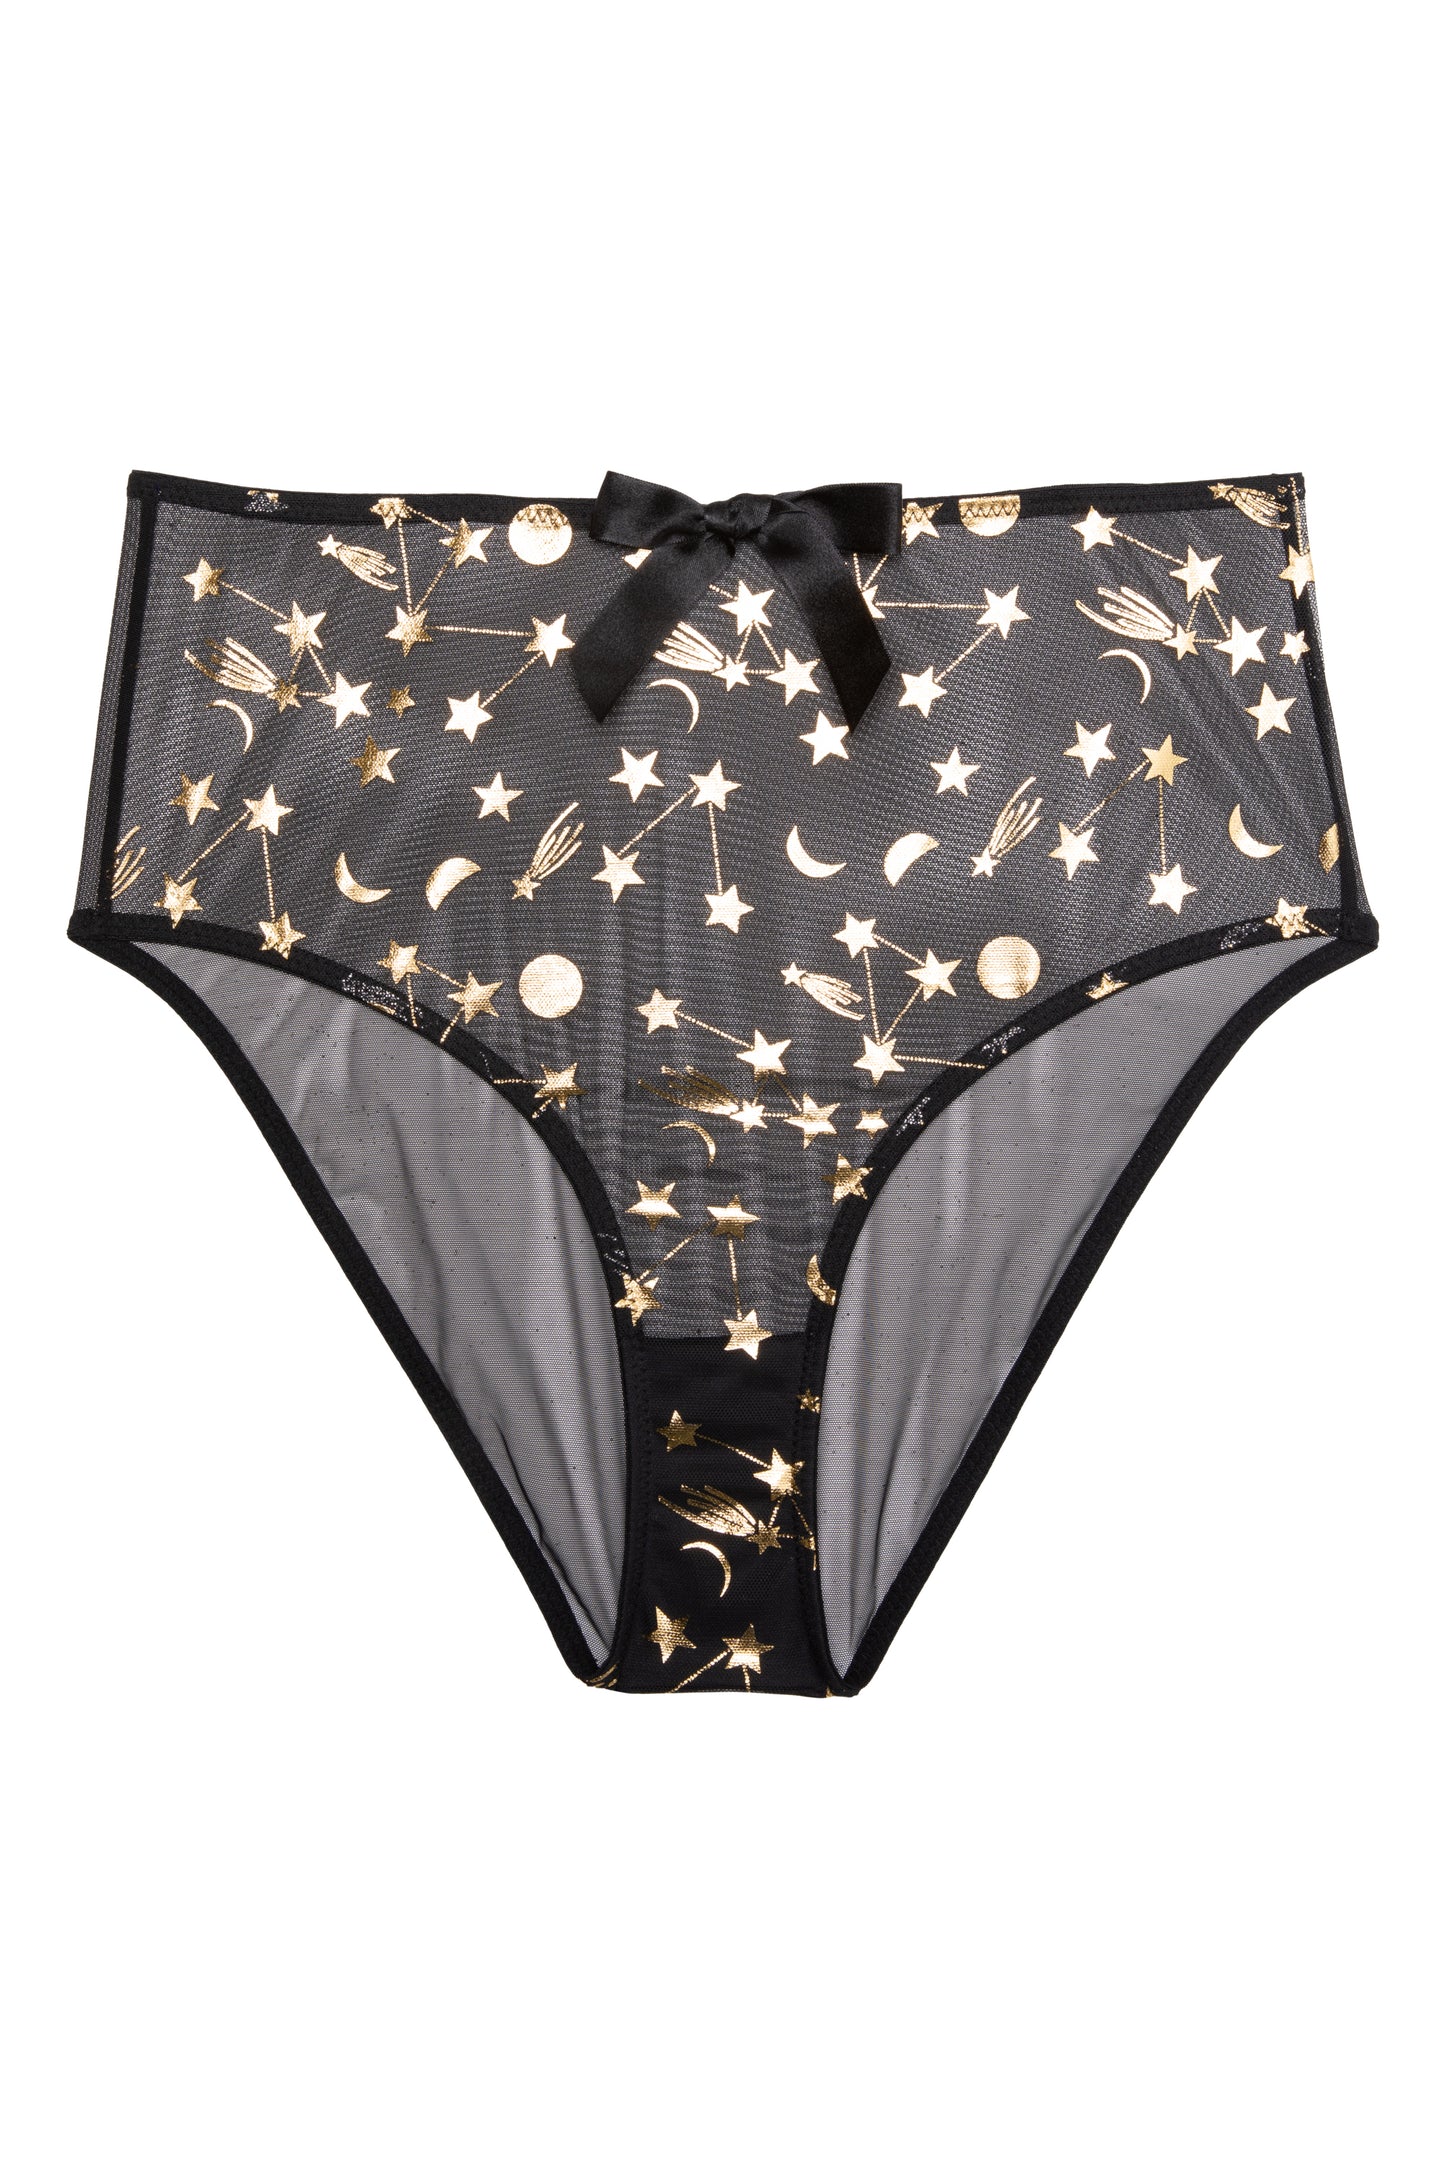 Solar Gold And Black Cosmic Print High Waist Brief By Bettie Page - size 20